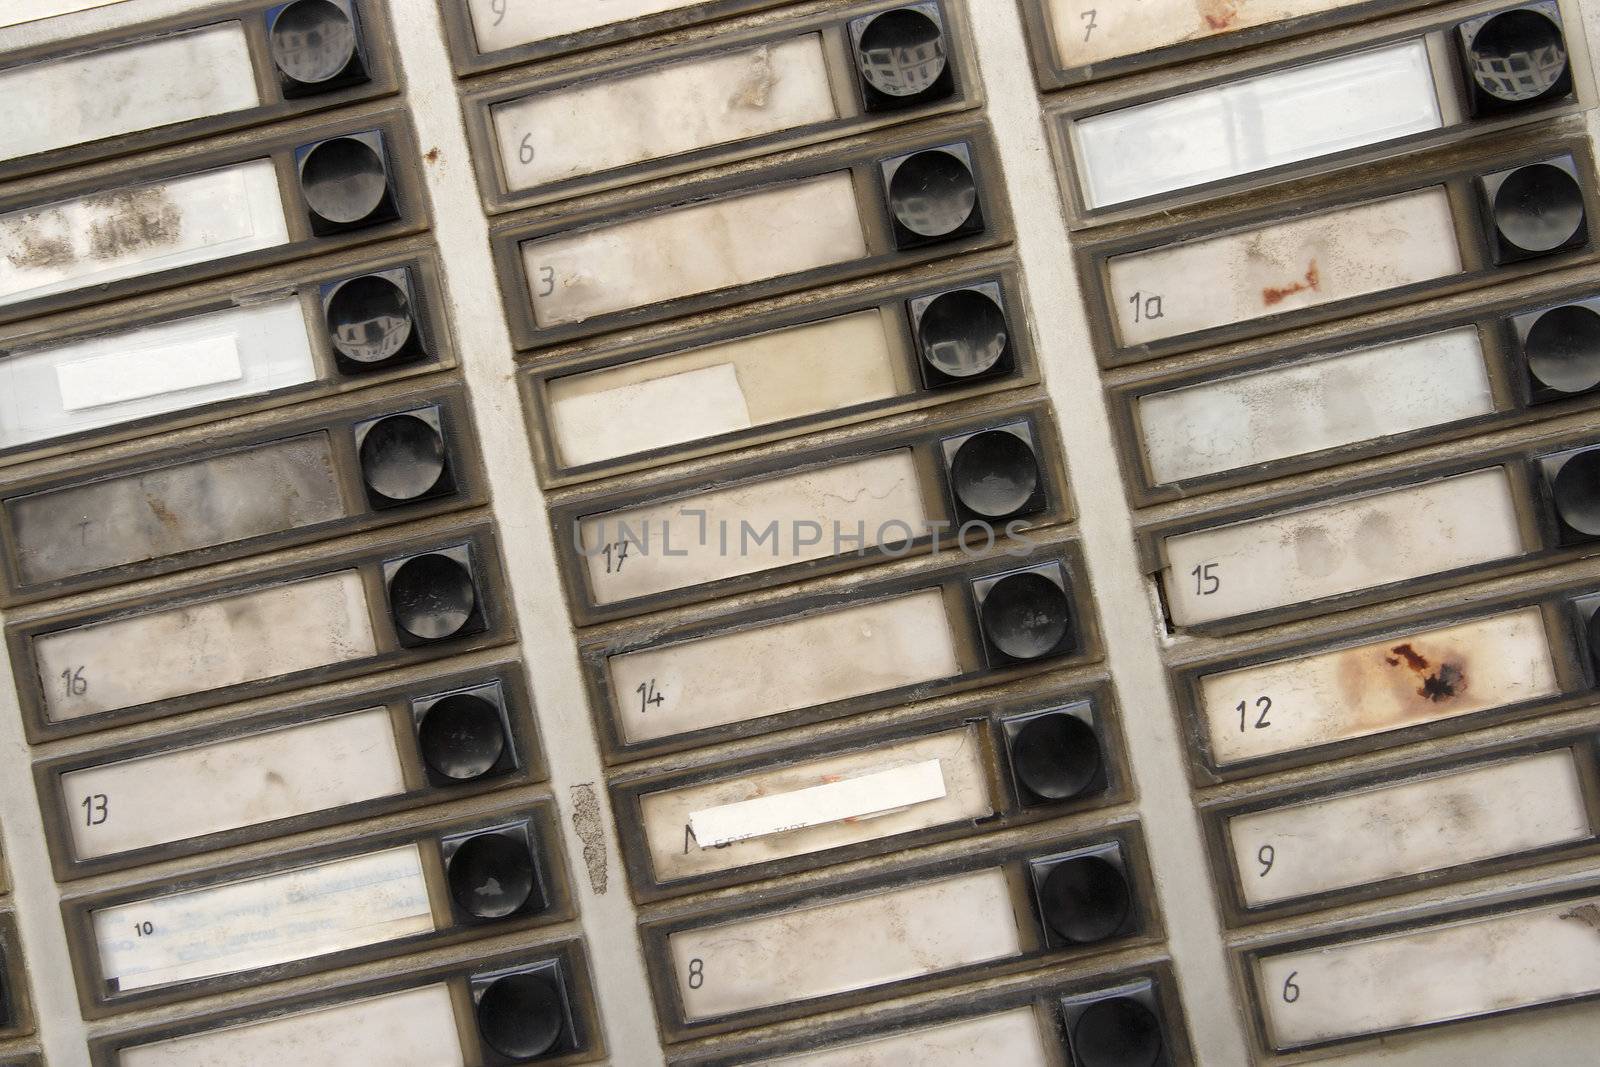 Background pattern of grungy old apartment buzzers - names removed.
